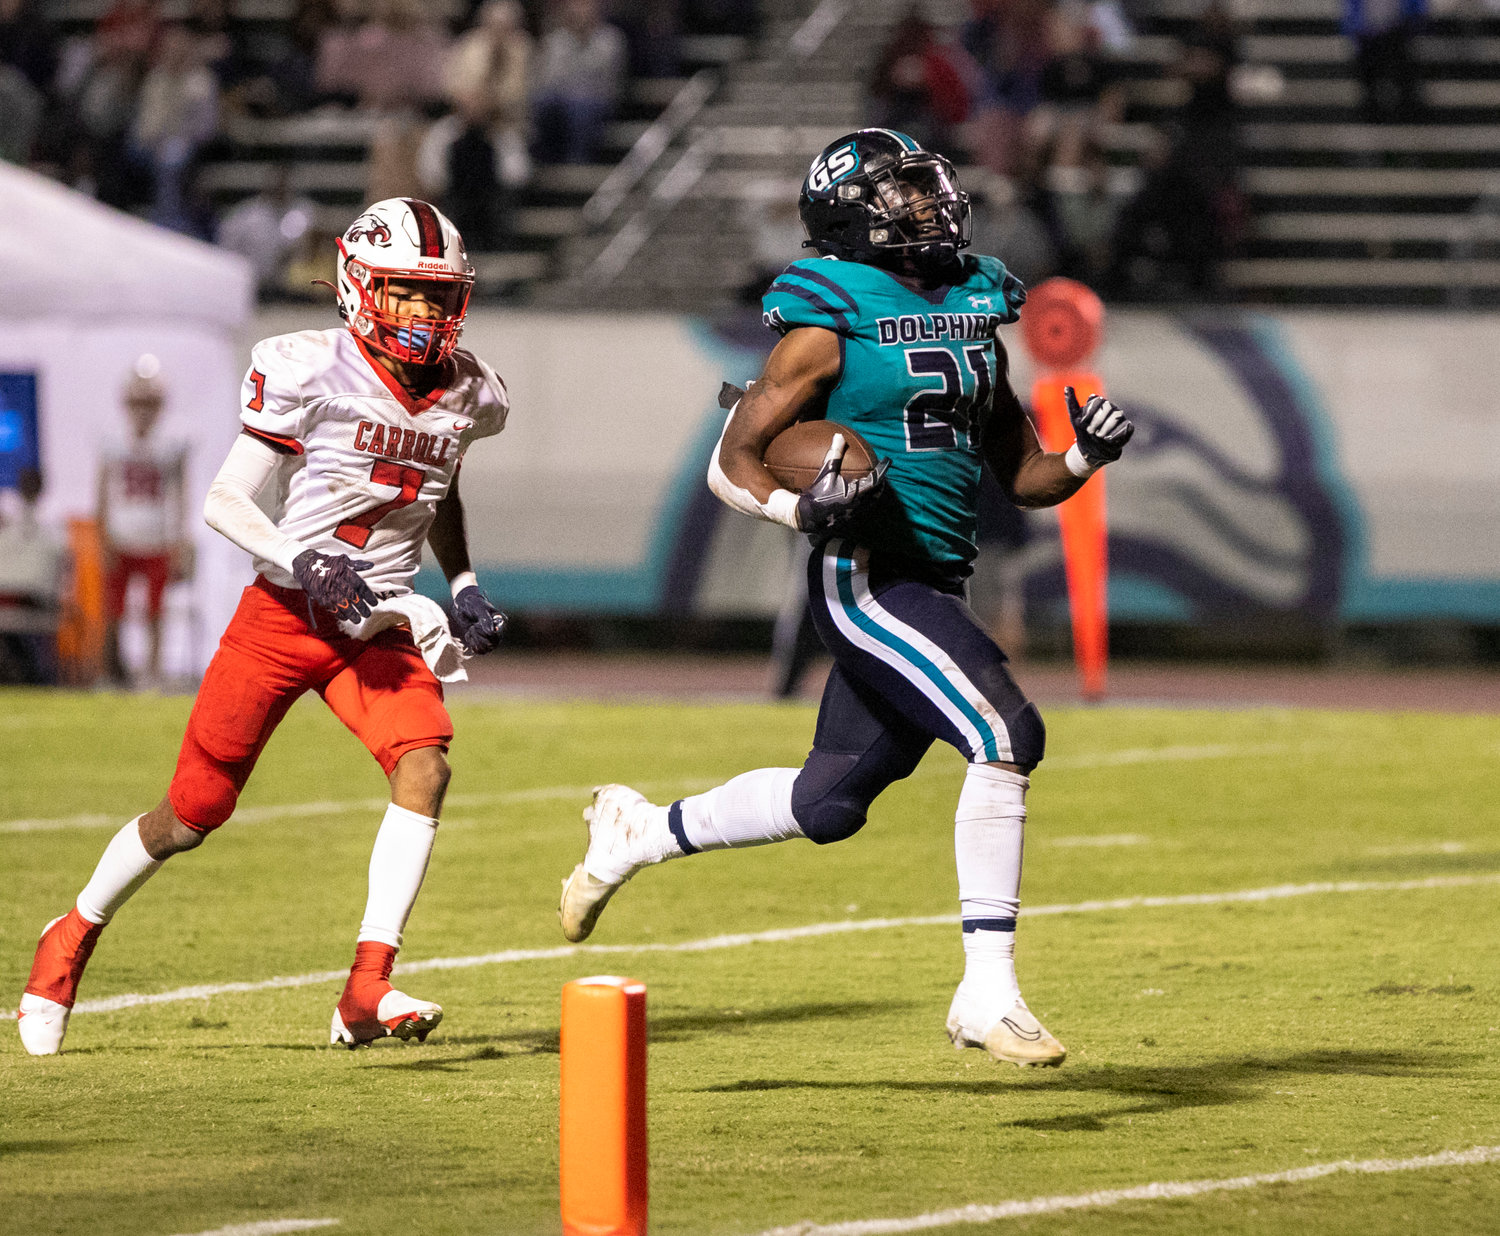 Gulf Shores senior JR Gardner cruises into the end zone on a 45-yard receiving touchdown from Brendon Byrd in the third quarter of the Dolphins’ first-round playoff game against the Carroll Eagles at Mickey Miller Blackwell Stadium Friday night. Gardner added a rushing touchdown to the 42-0 victory.